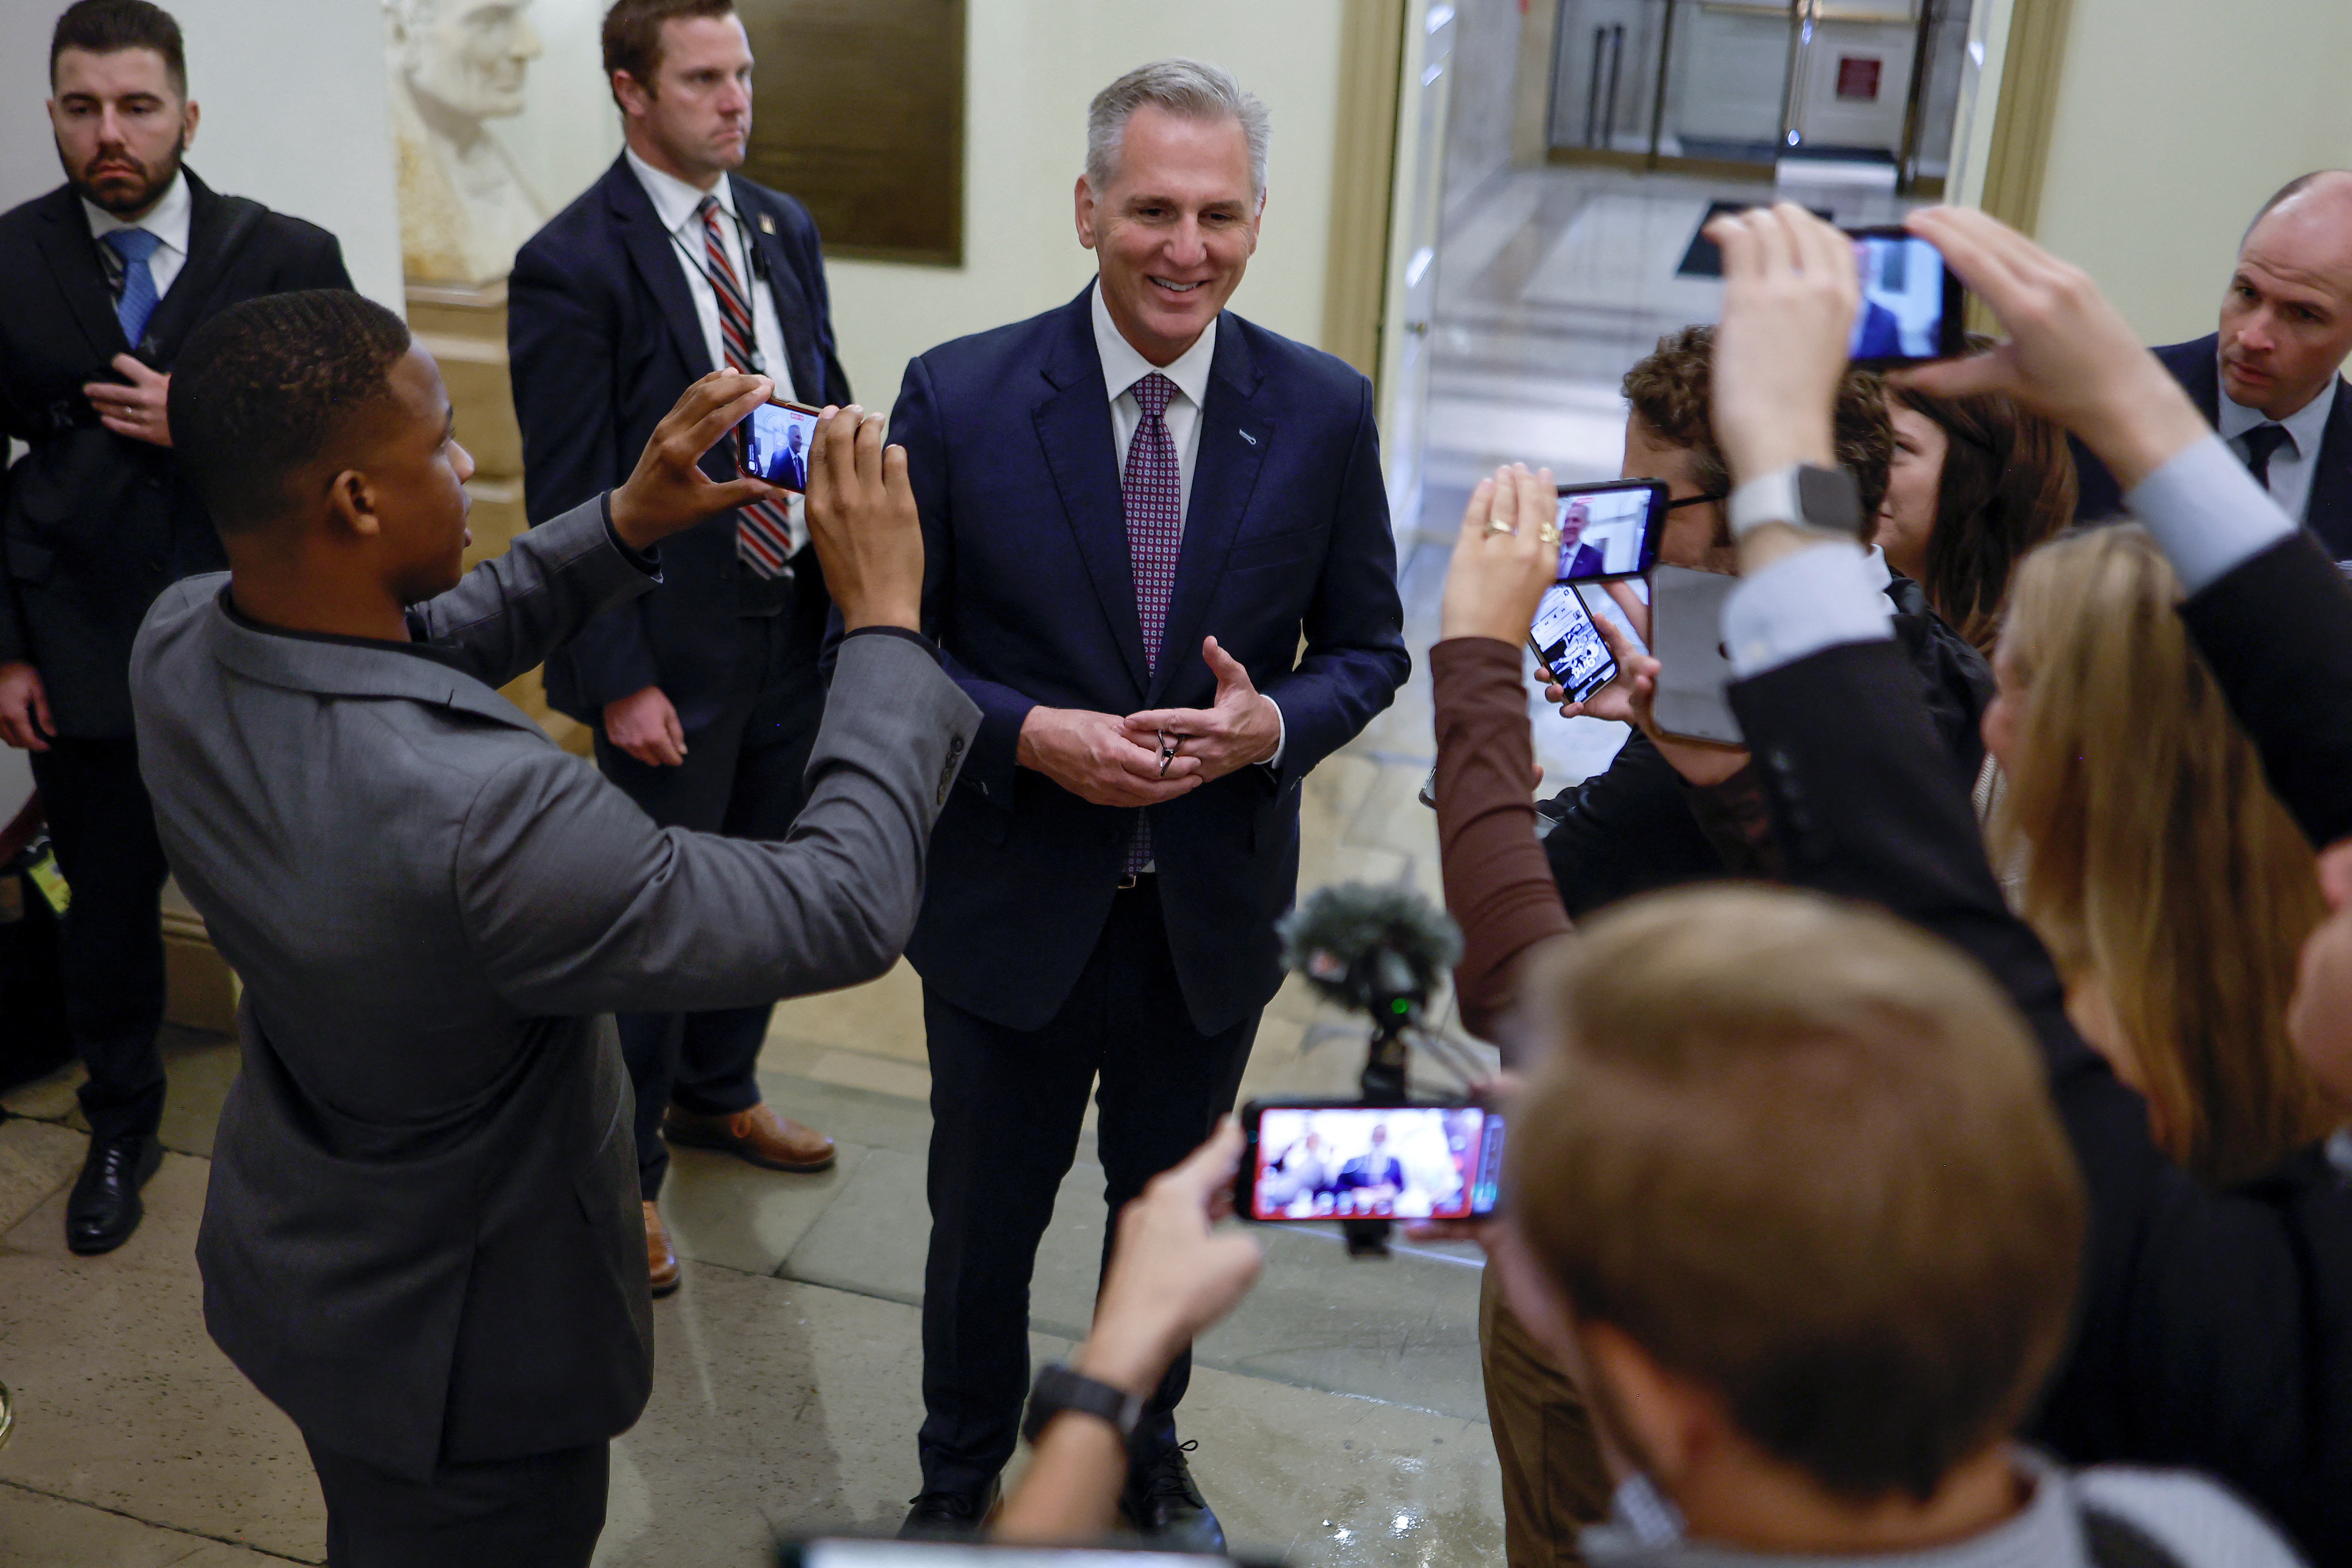 U.S. House Speaker McCarthy arrives for the day at the U.S. Capitol in Washington